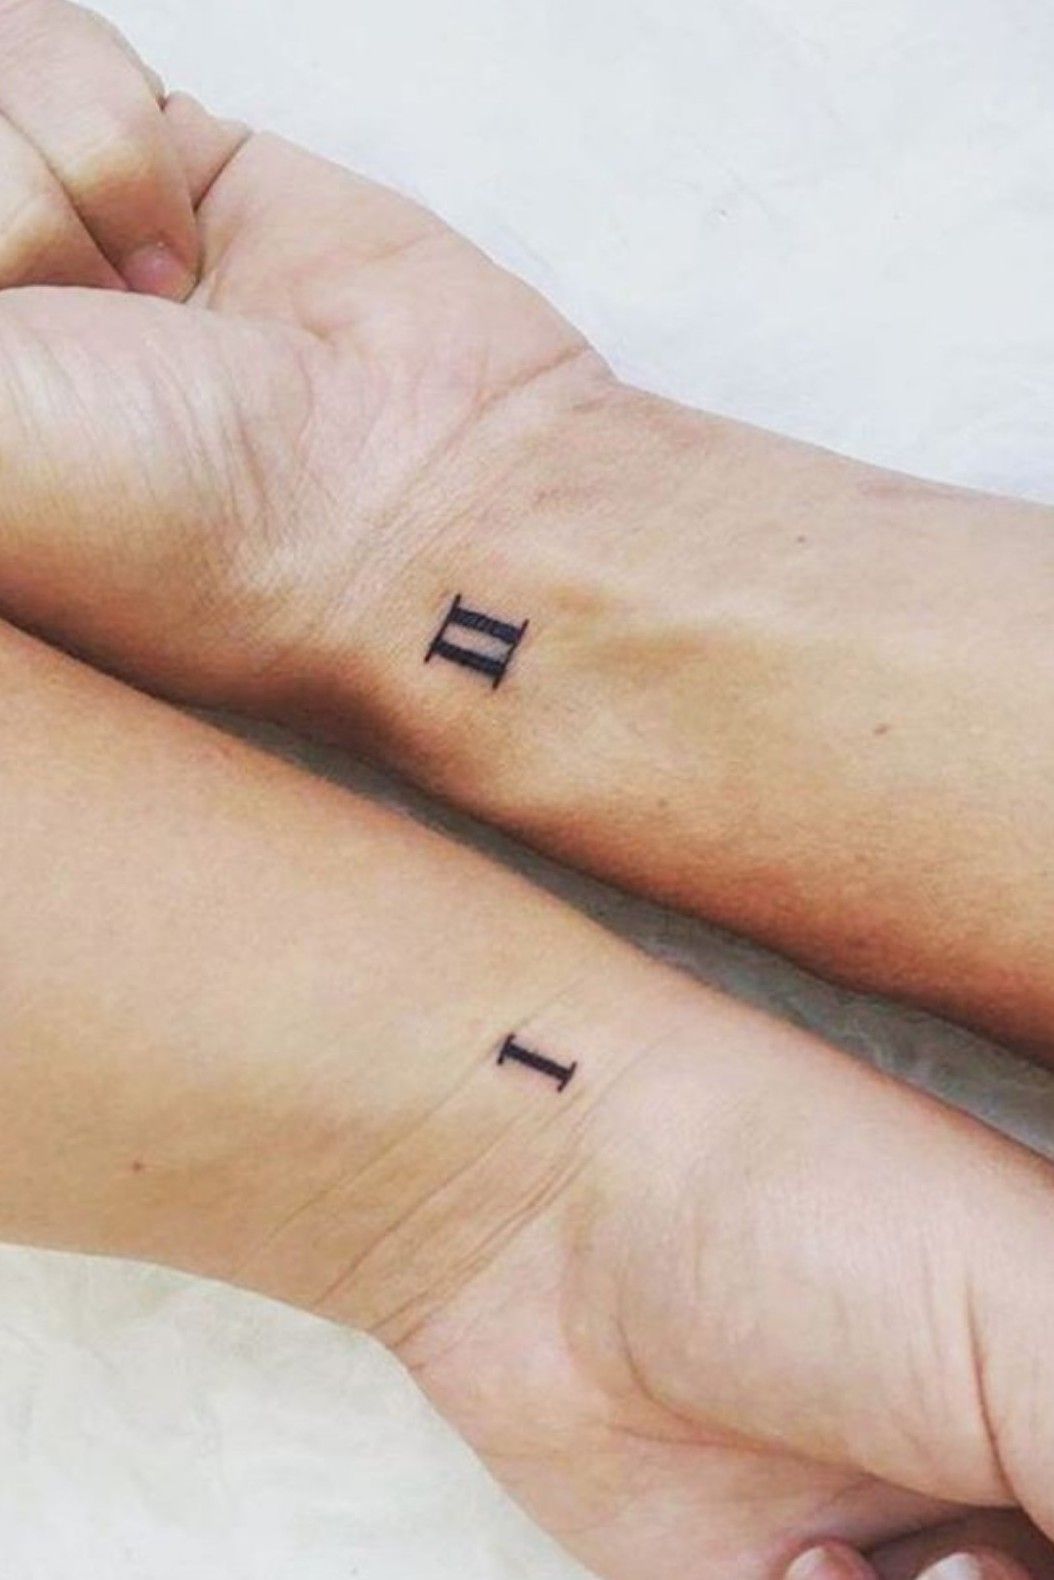 100 Brother And Sister Tattoos That Celebrate The LoveHate Sibling  Relationship  Bored Panda